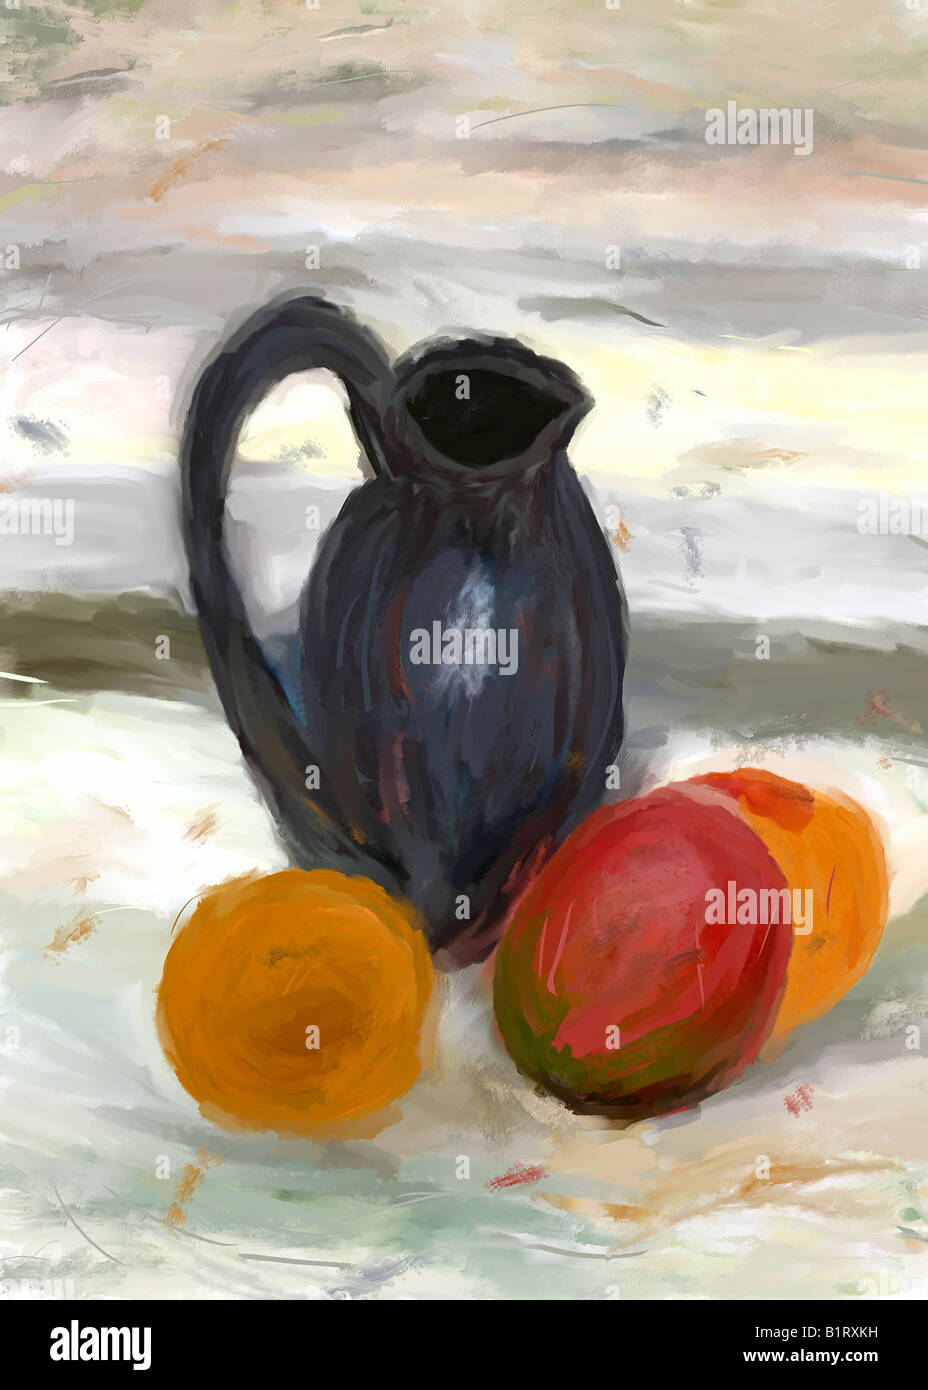 Still life painting with fruit and pitcher Stock Photo